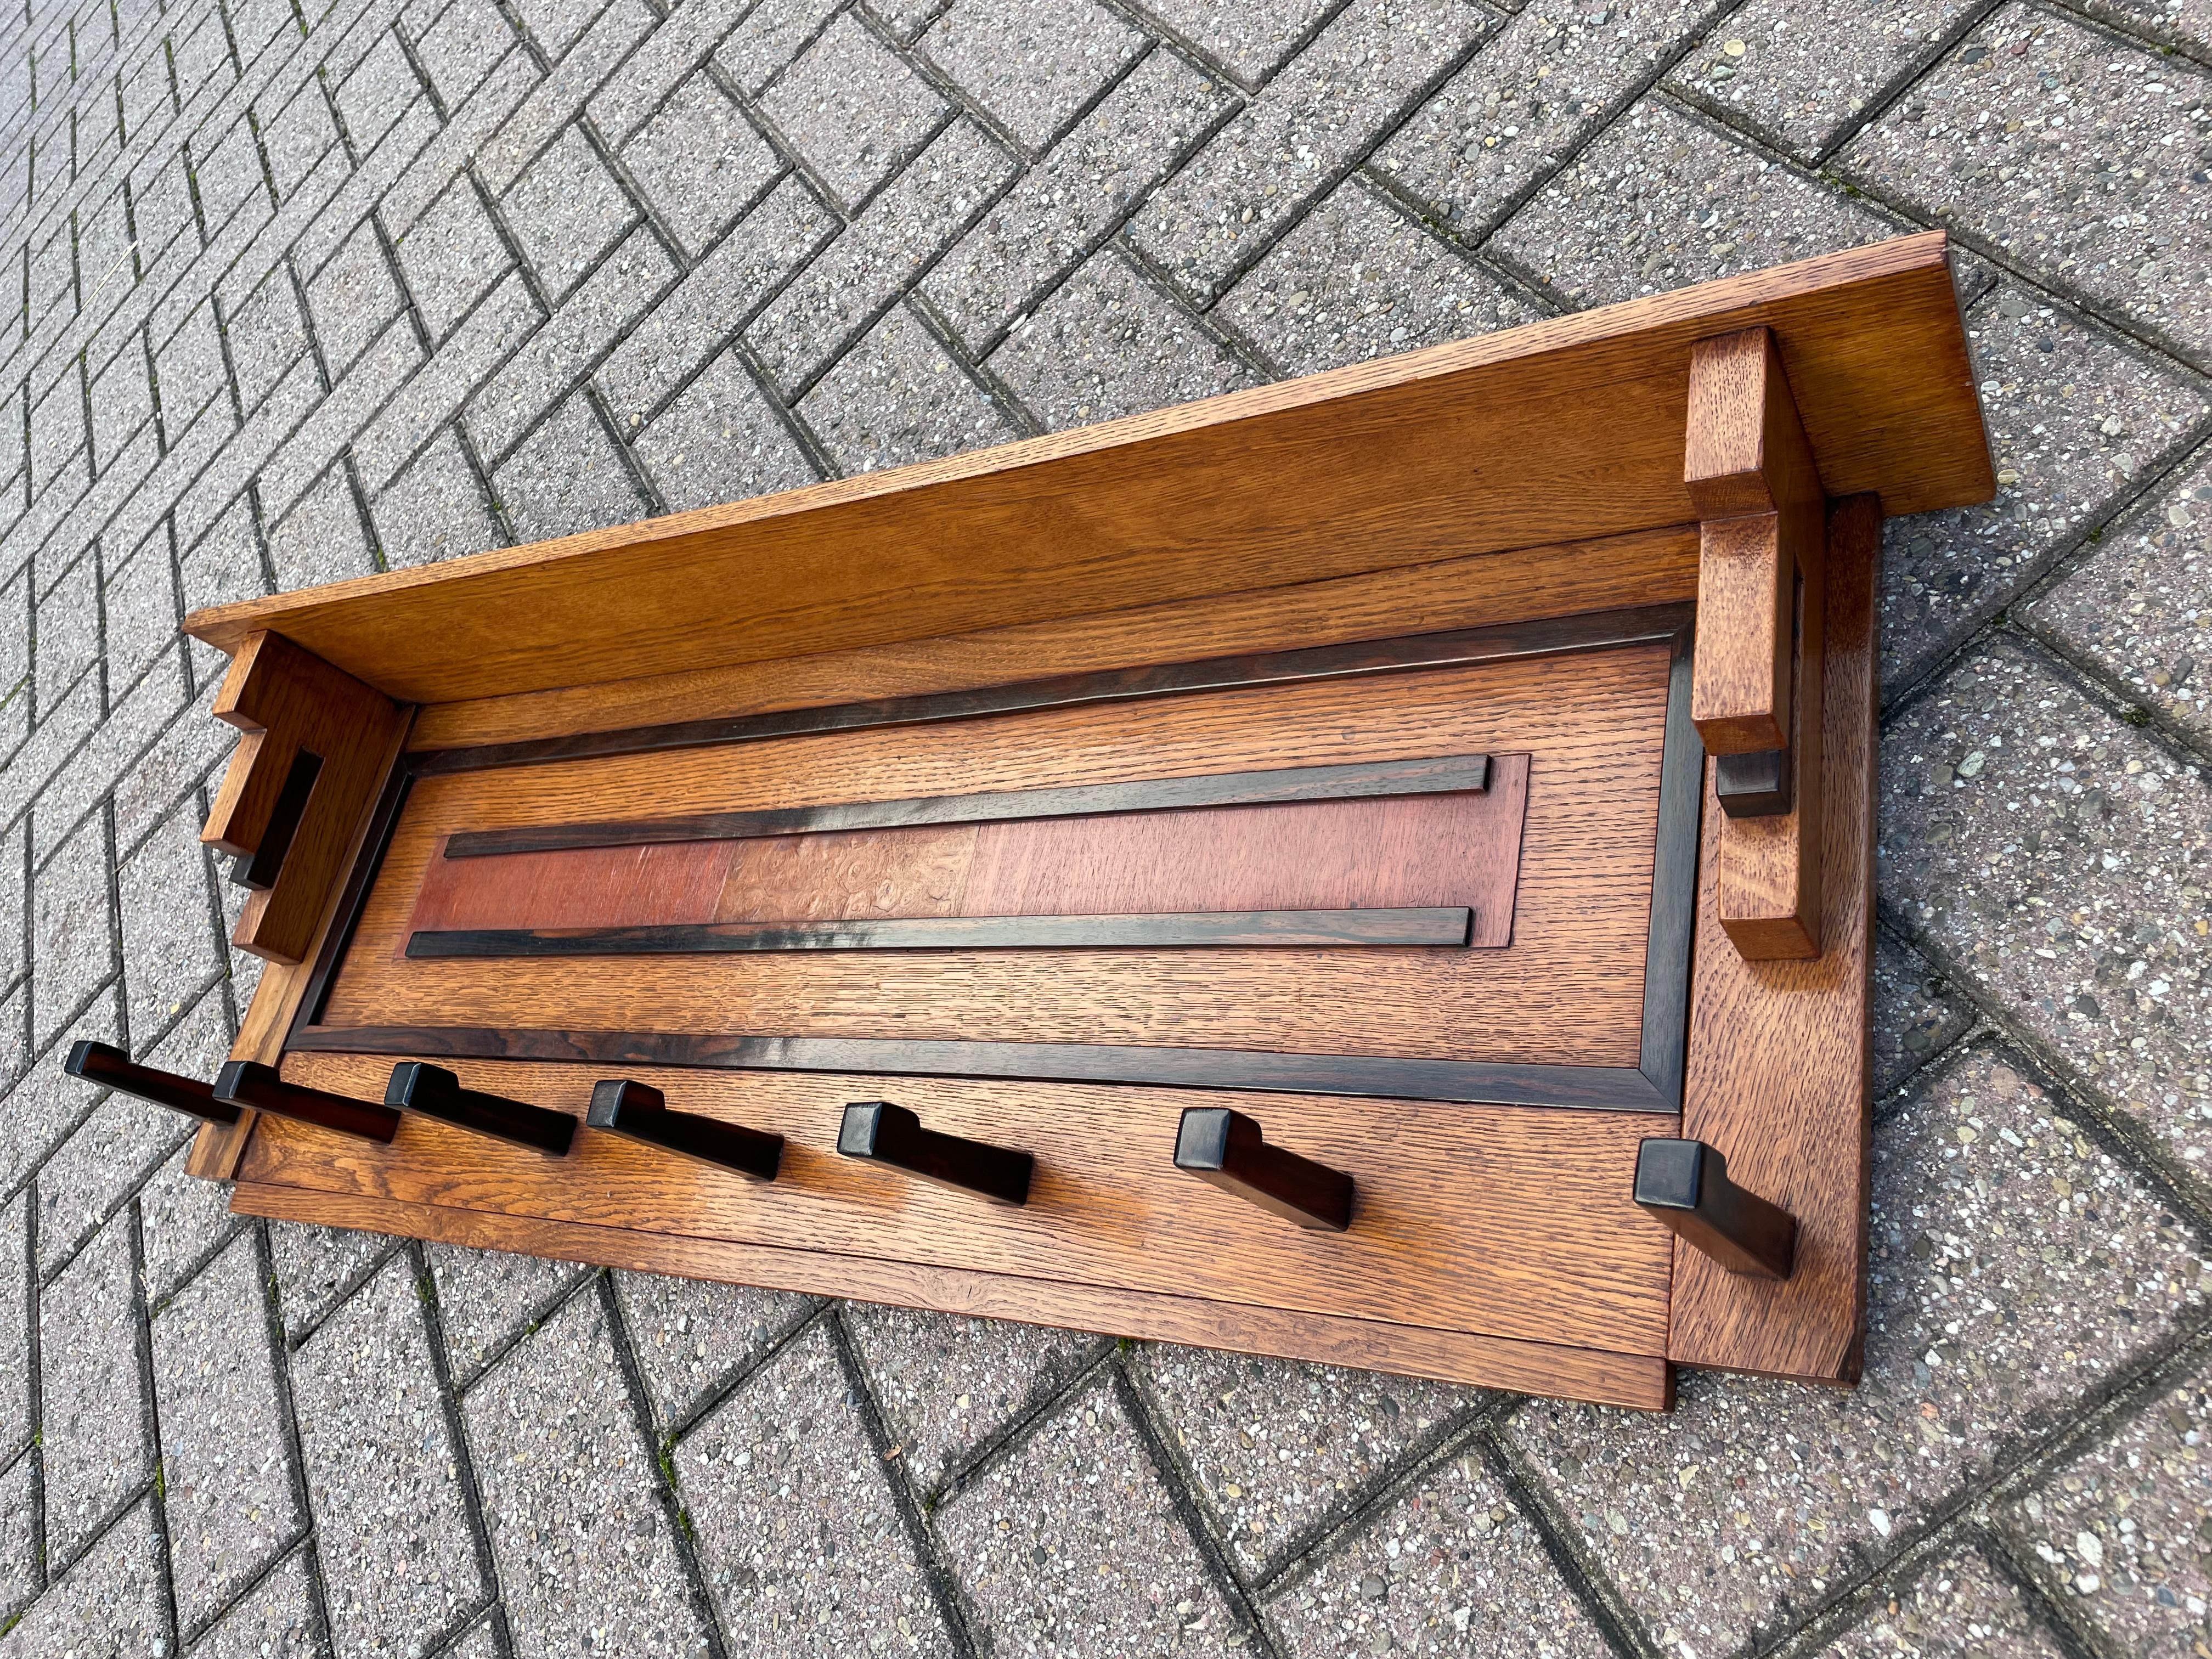 Rare, great looking and superb condition Dutch Art Deco coat rack

This geometrical coat rack from the Dutch Art Deco era was designed by Paul Izeren and executed in the studio of 'De Genneper Molen' in the Netherlands. This studio was named after